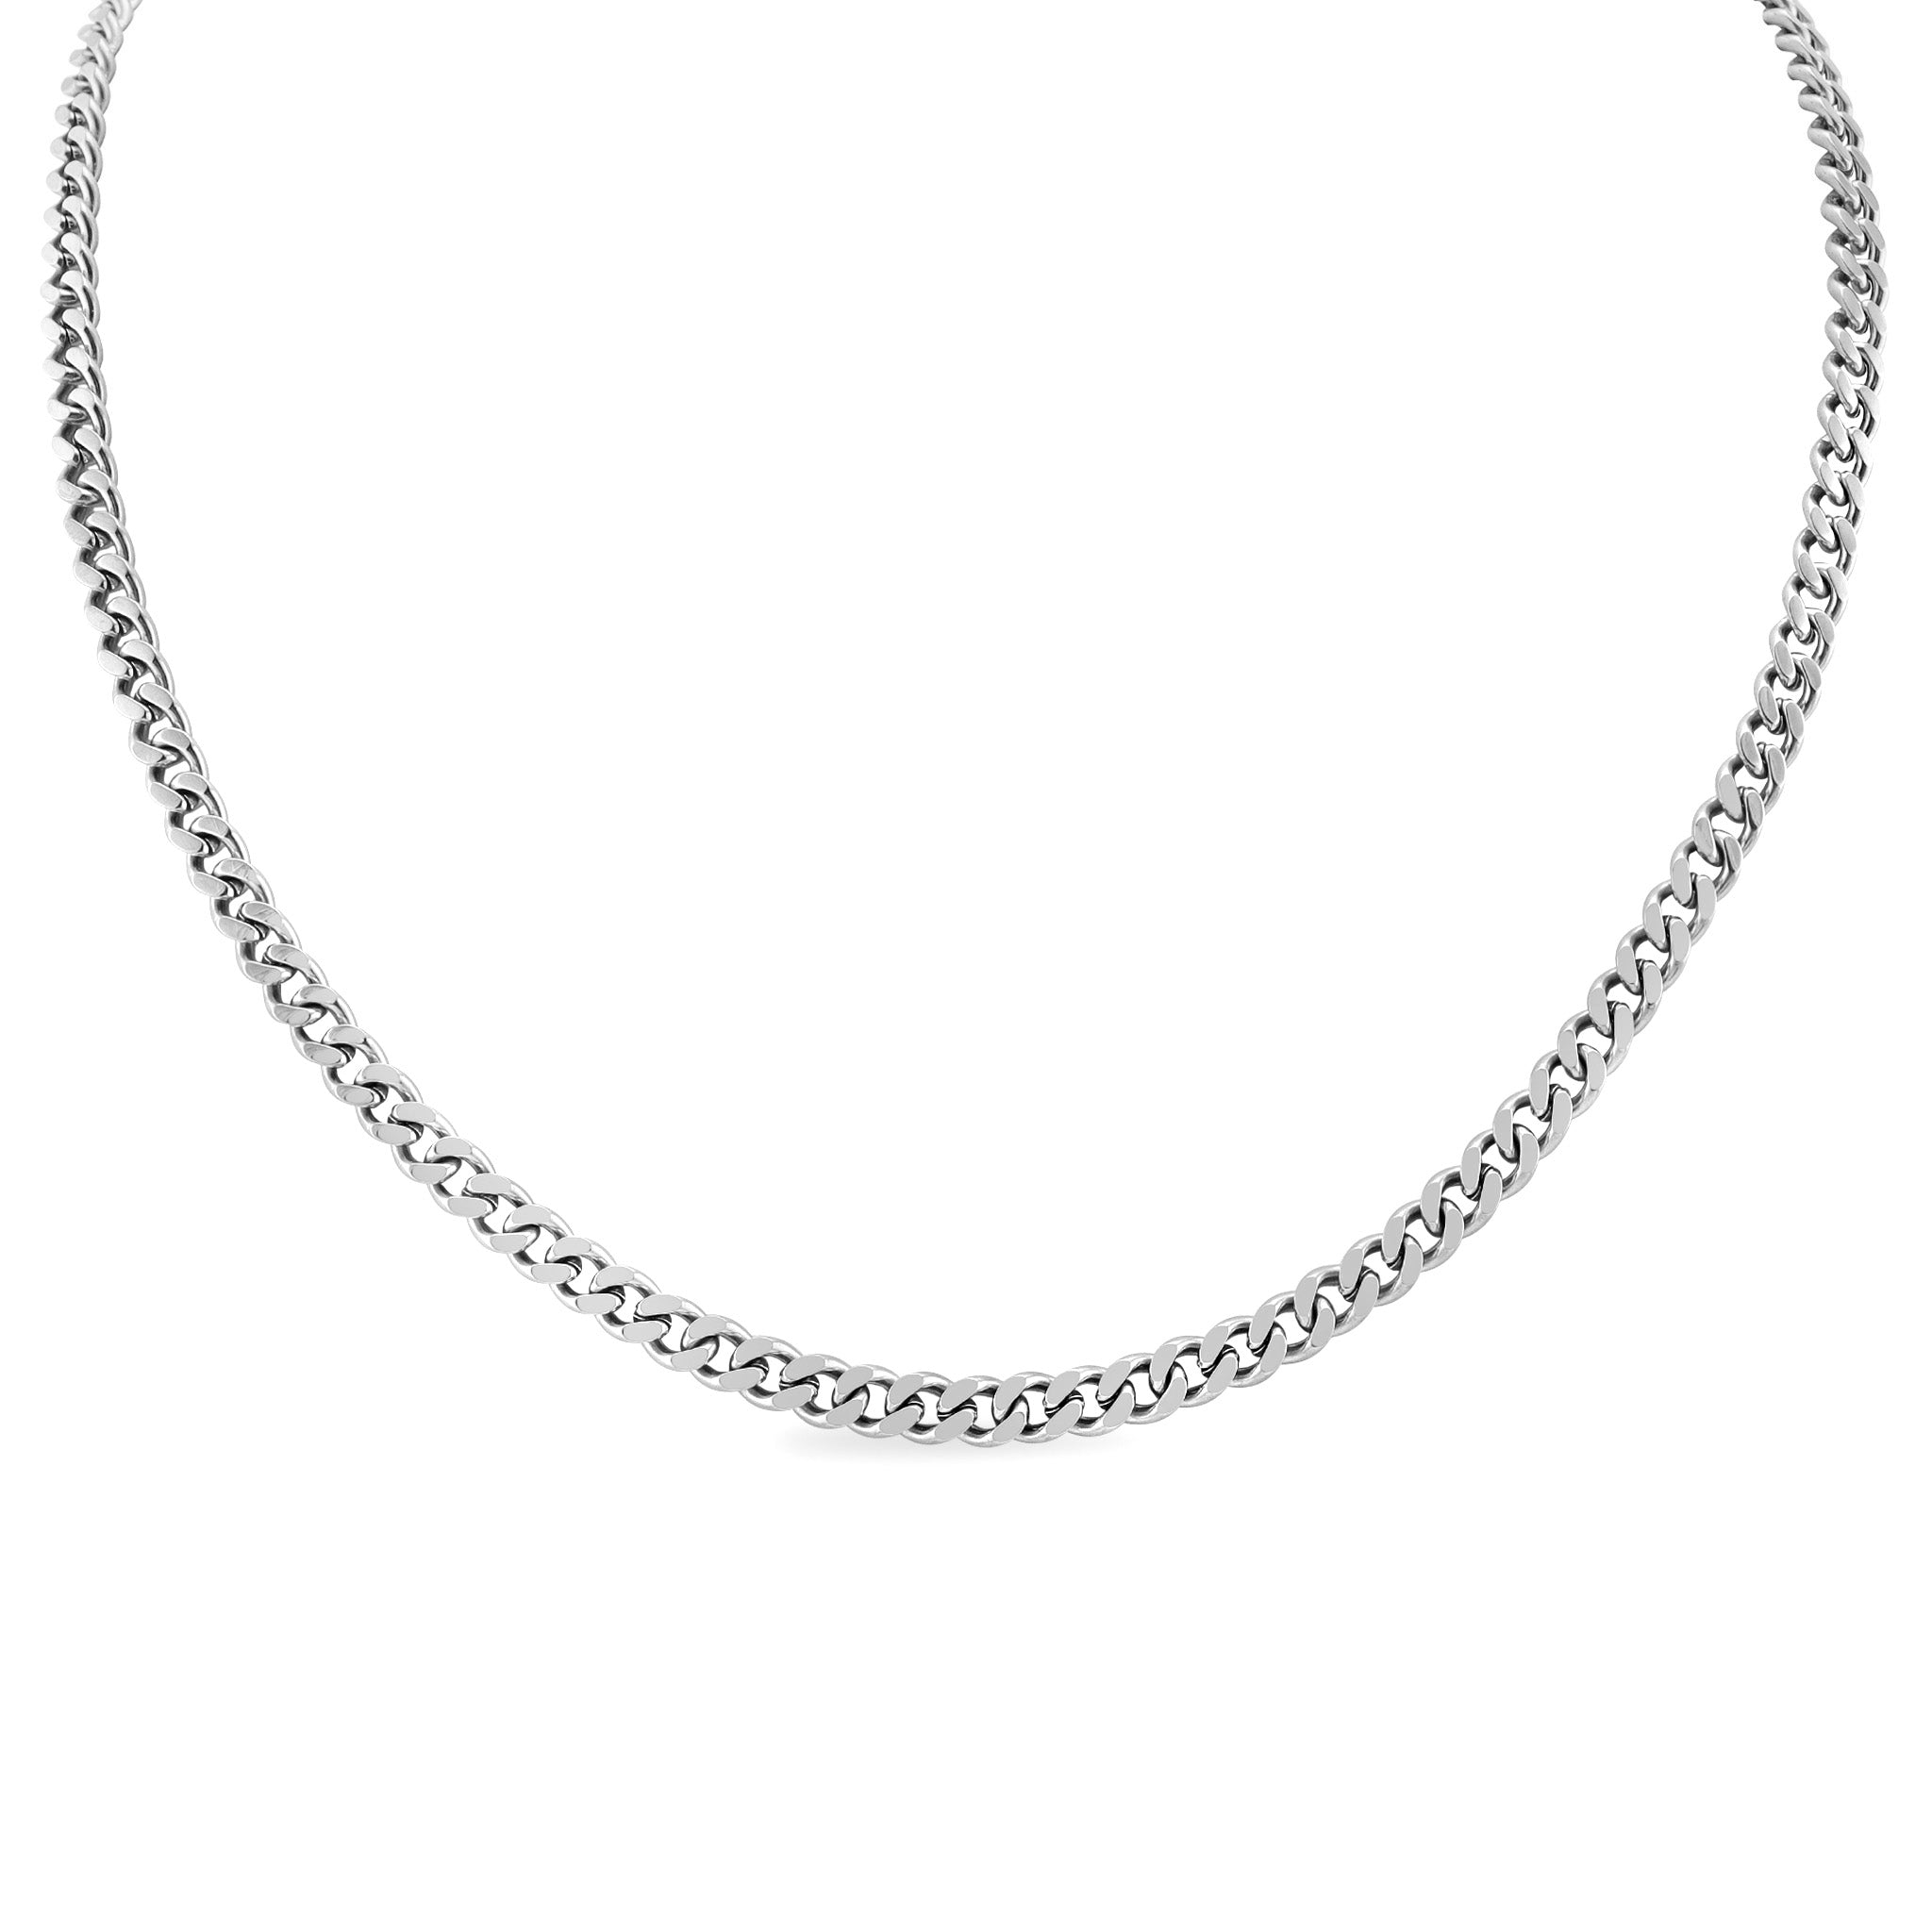 Mens Curb Chain necklace | Autumn and May | Sterling Silver Jewellery